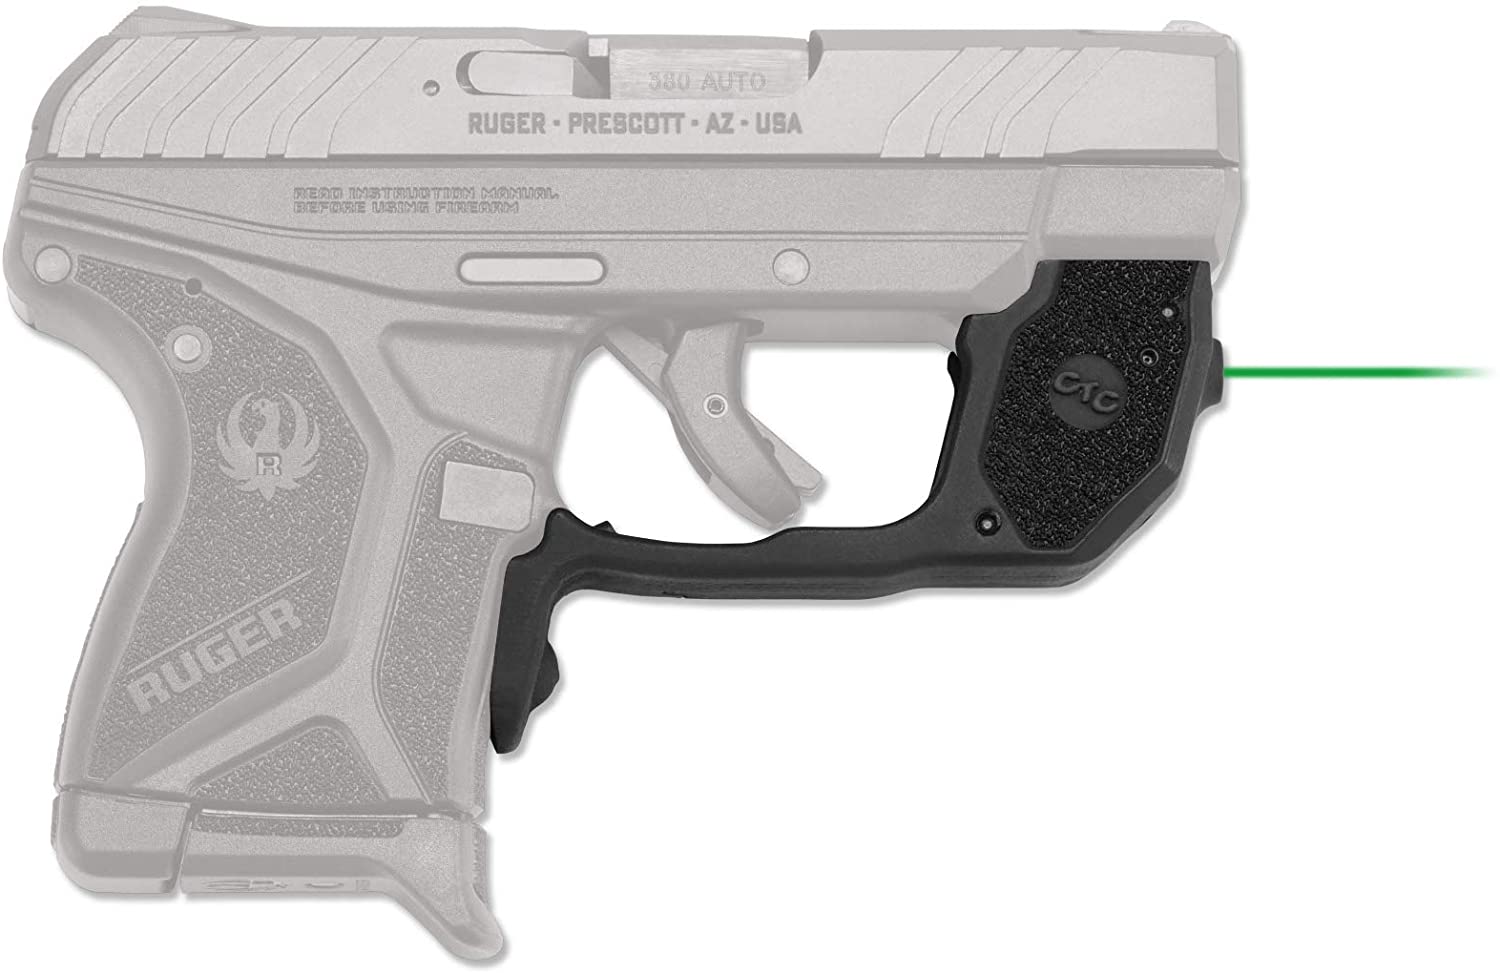 Crimson Trace LG-497G for Ruger LCP II